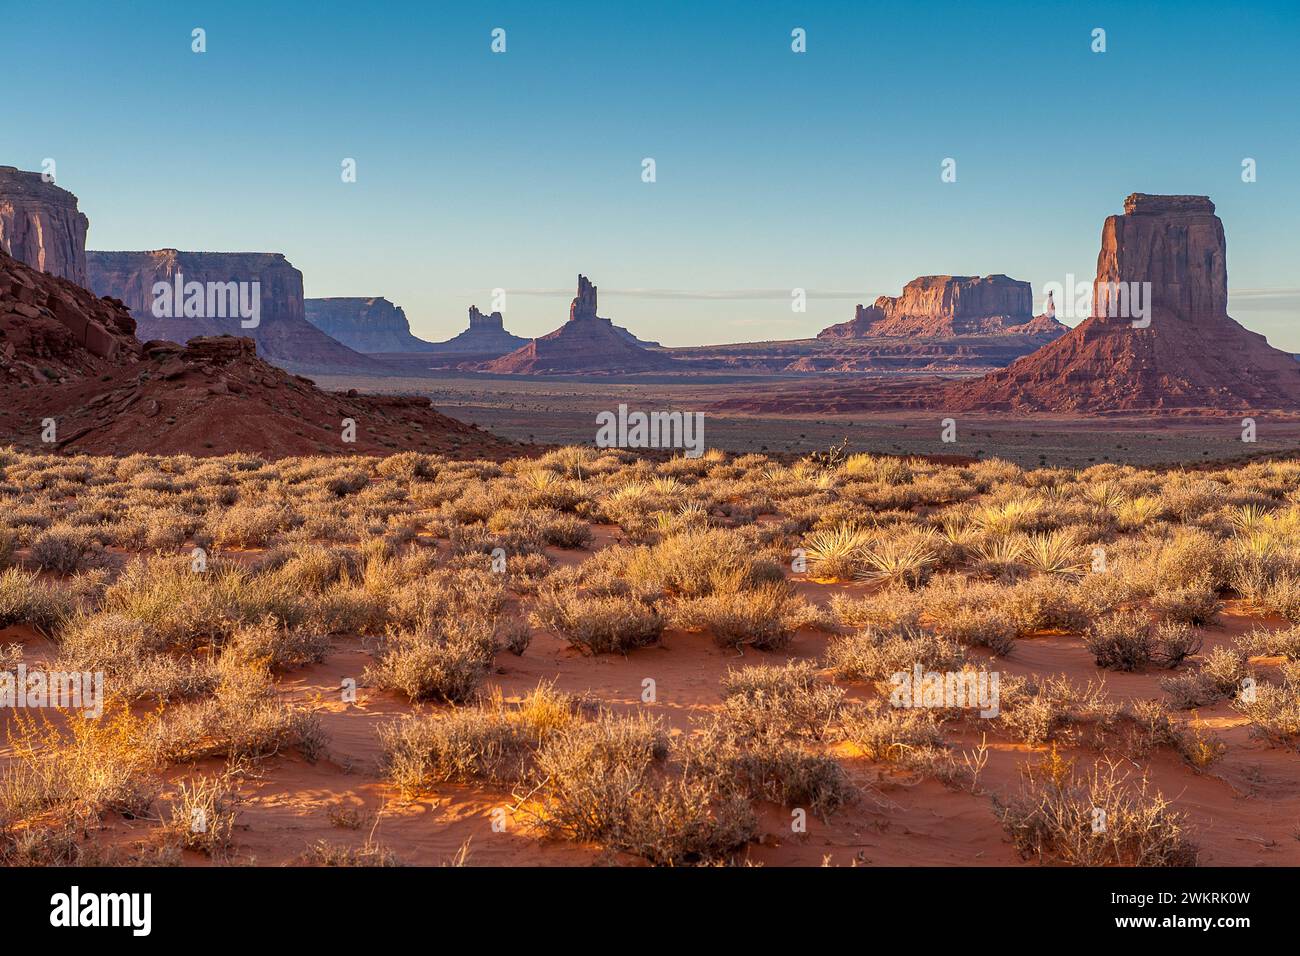 Navajo Code Talker Outpost in Monument Valley, which belongs to the Navajo Nation and is famous for its iconic buttes. Stock Photo